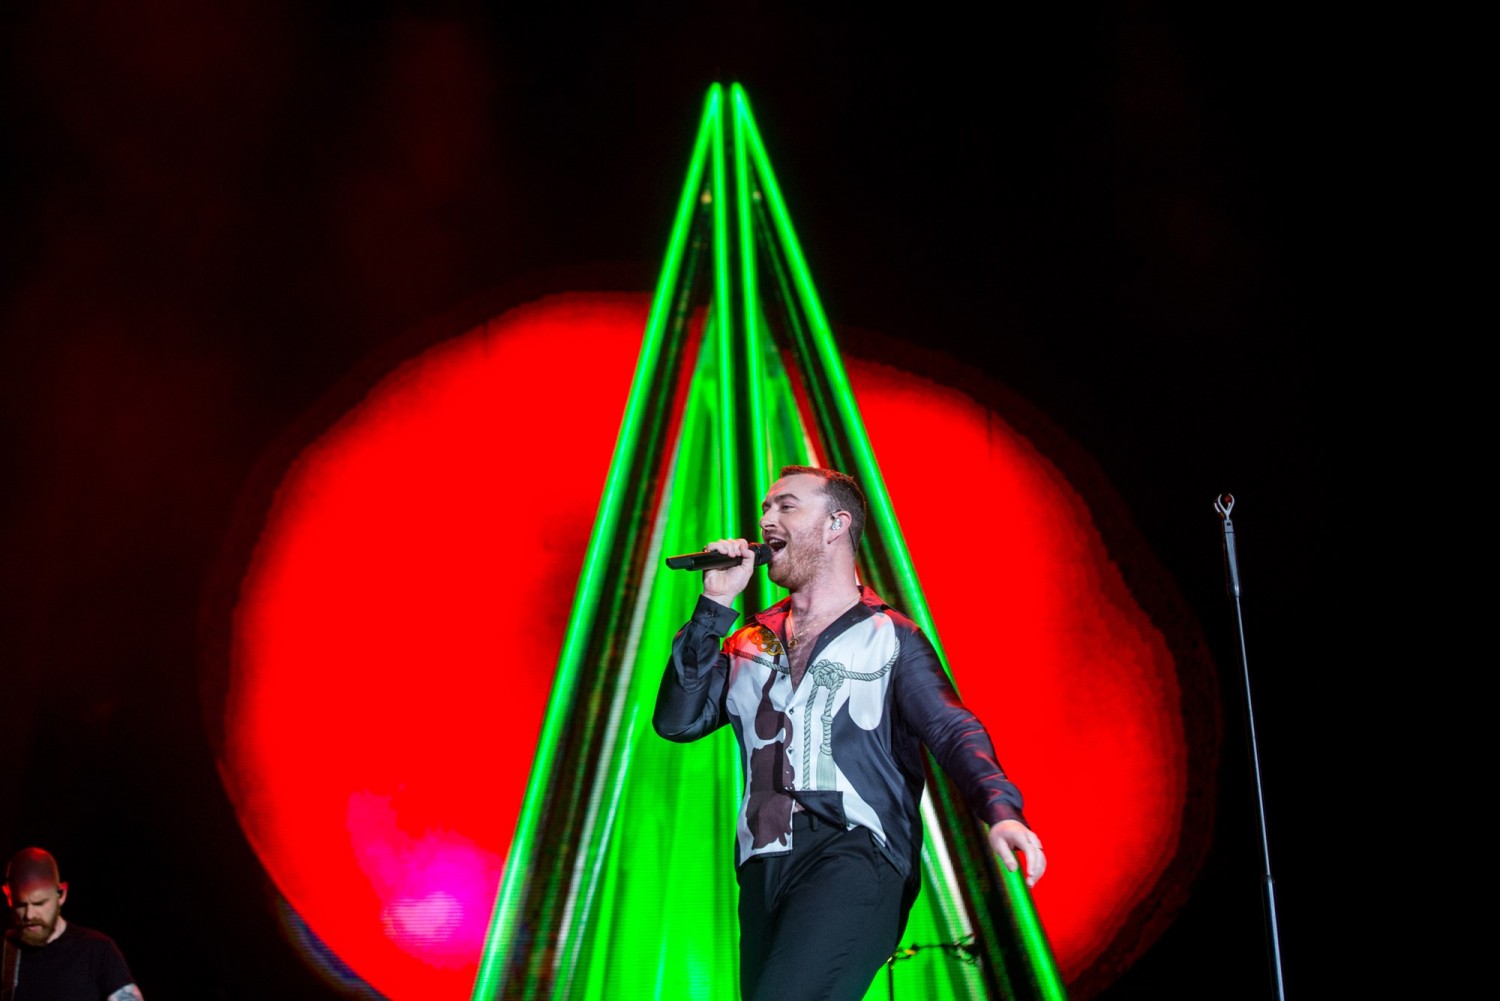 Sam Smith performs during the second day of Lollapalooza Buenos Aires 2019 at Hipodromo de San Isidro on March 30, 2019 in Buenos Aires, Argentina.Santiago Bluguermann / Getty Images